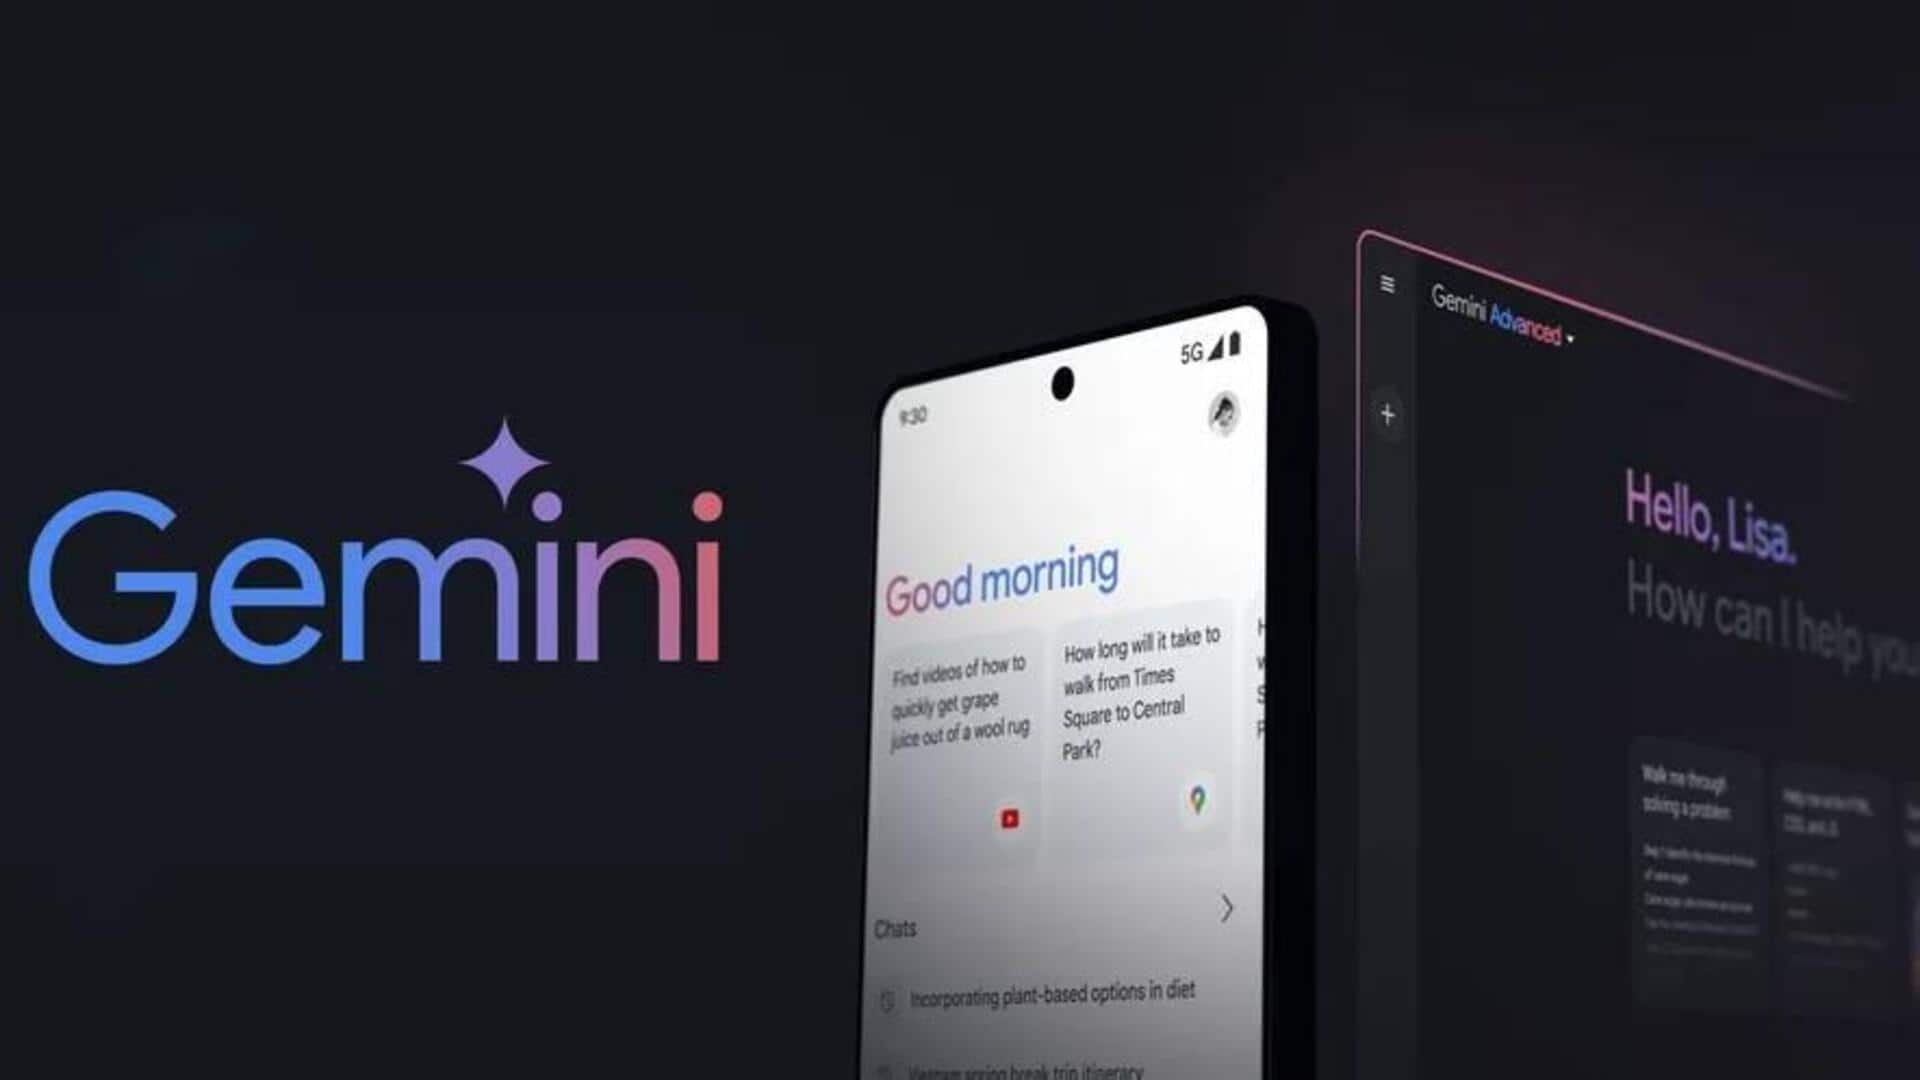 Gemini has access to these Google Assistant features: Check list